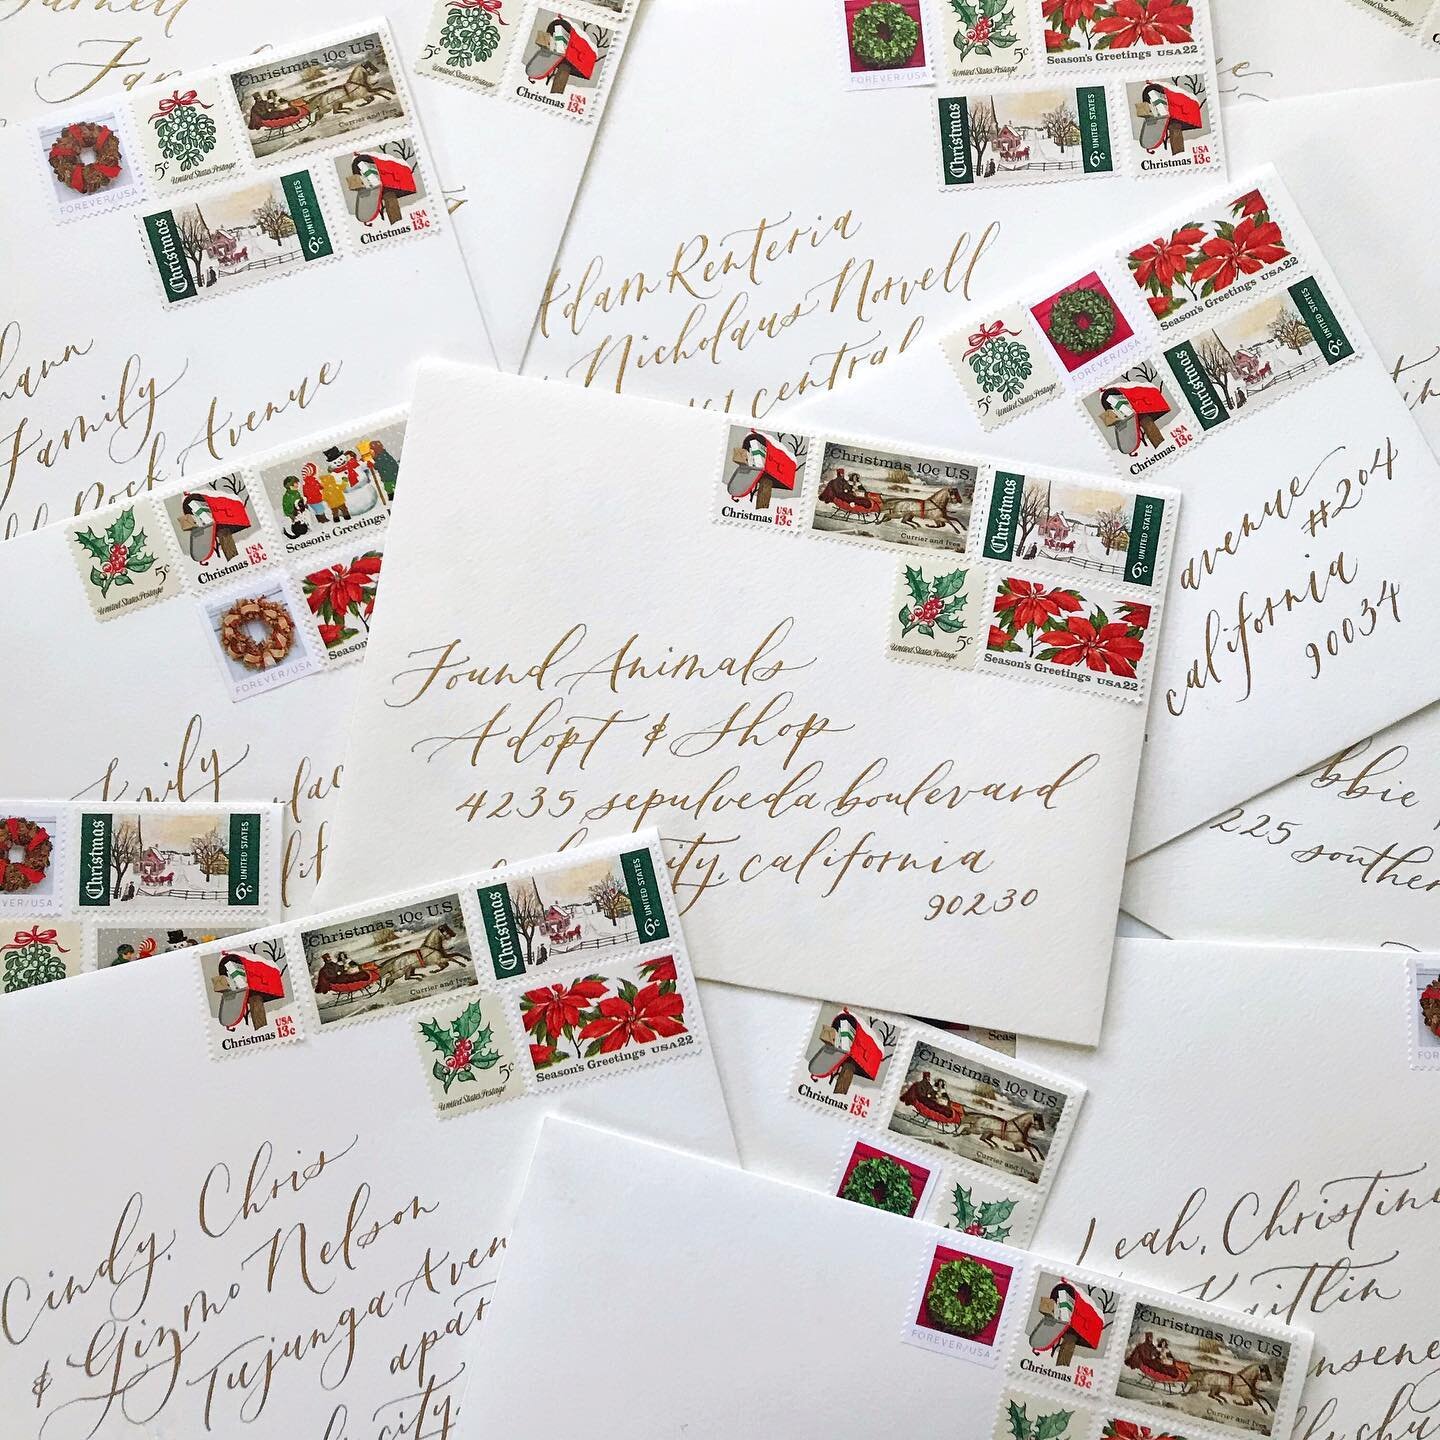 This is my first year sending out Holiday cards so you know I had to go all out! Fancy envelopes, gold calligraphy, and all the vintage postage! 💌✨
And yes, I sent one to where I adopted Ginny (@adoptnshop check em out!) because they gave me they gr